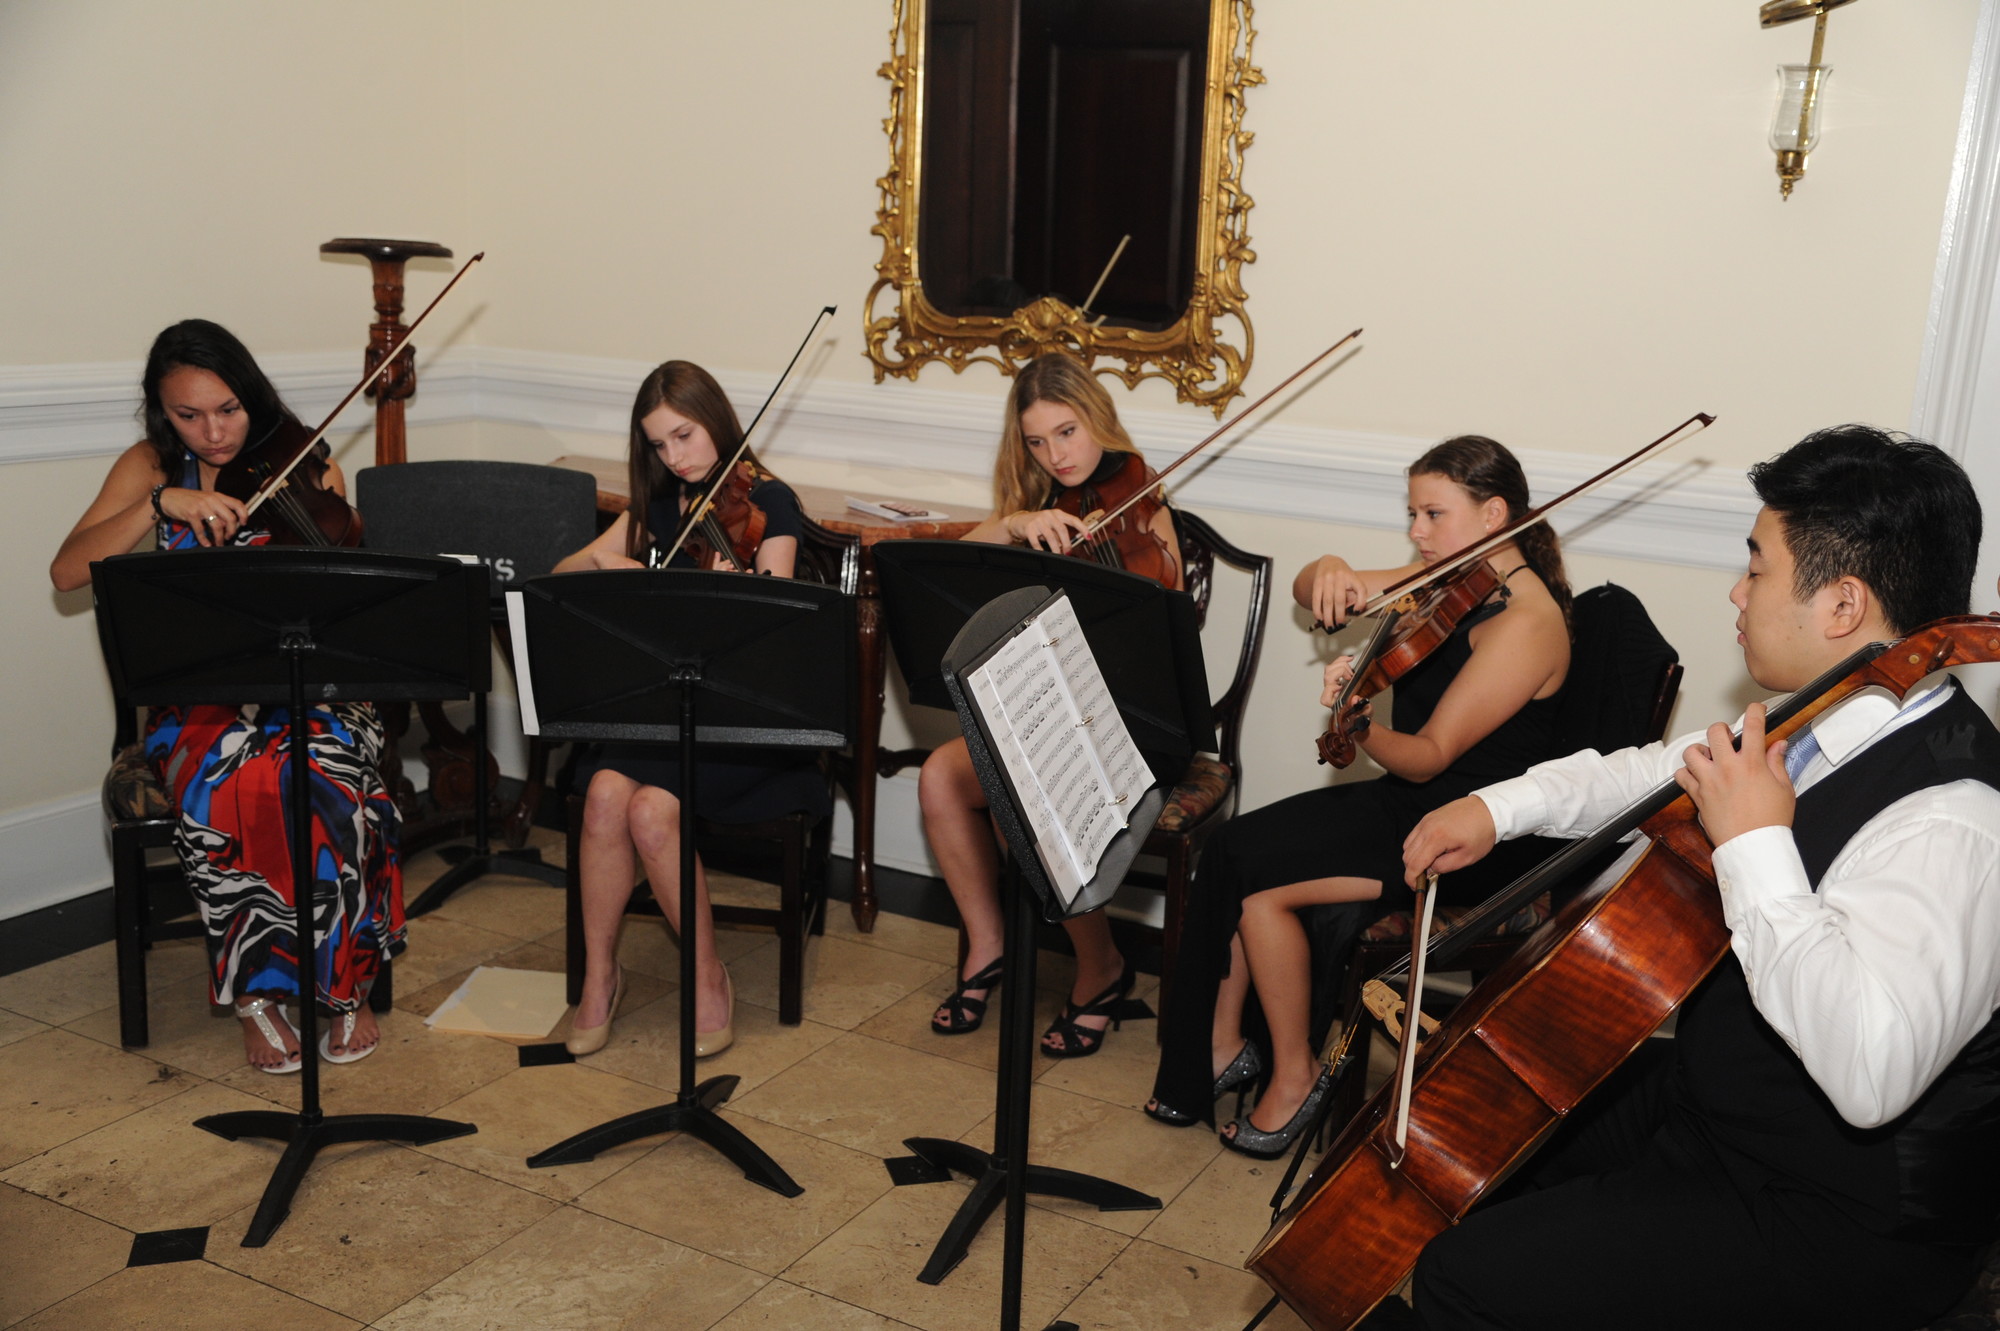 The String Ensemble from East Meadow High School entertained the crowd.